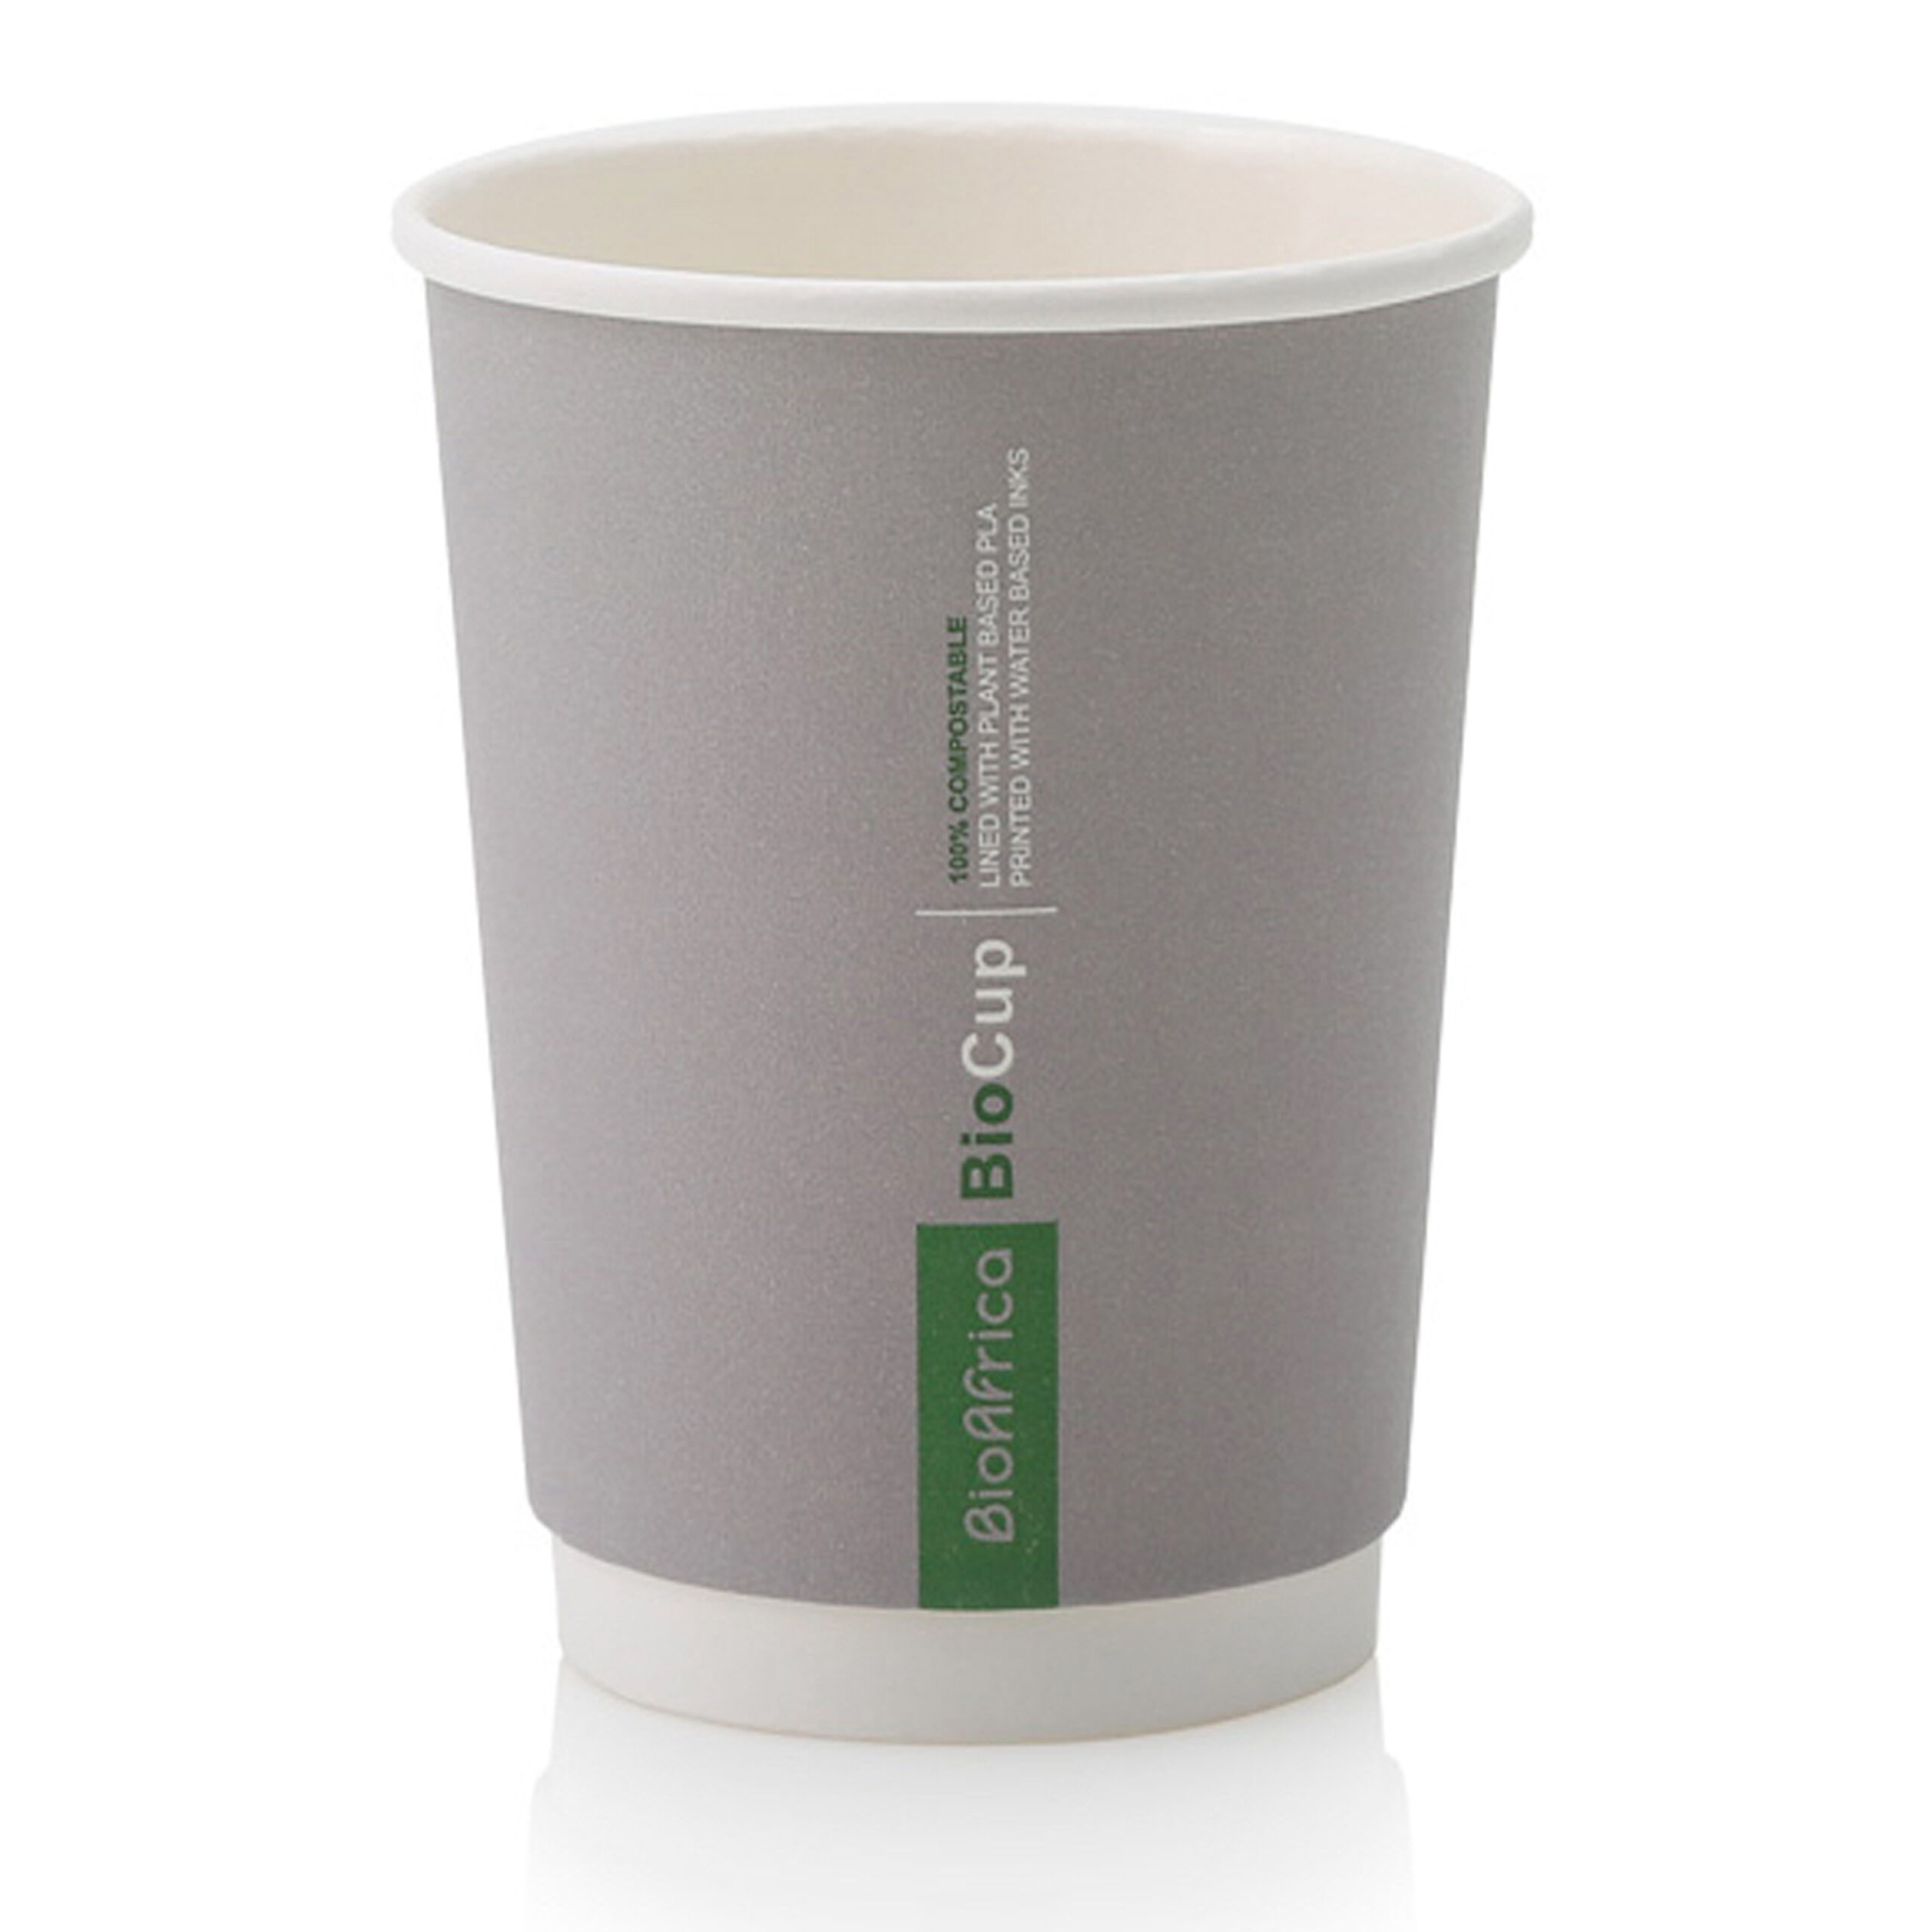 BIOAFRICA DOUBLE WALL COMPOSTABLE BIOCUP 350ml KRAFT (1x25)